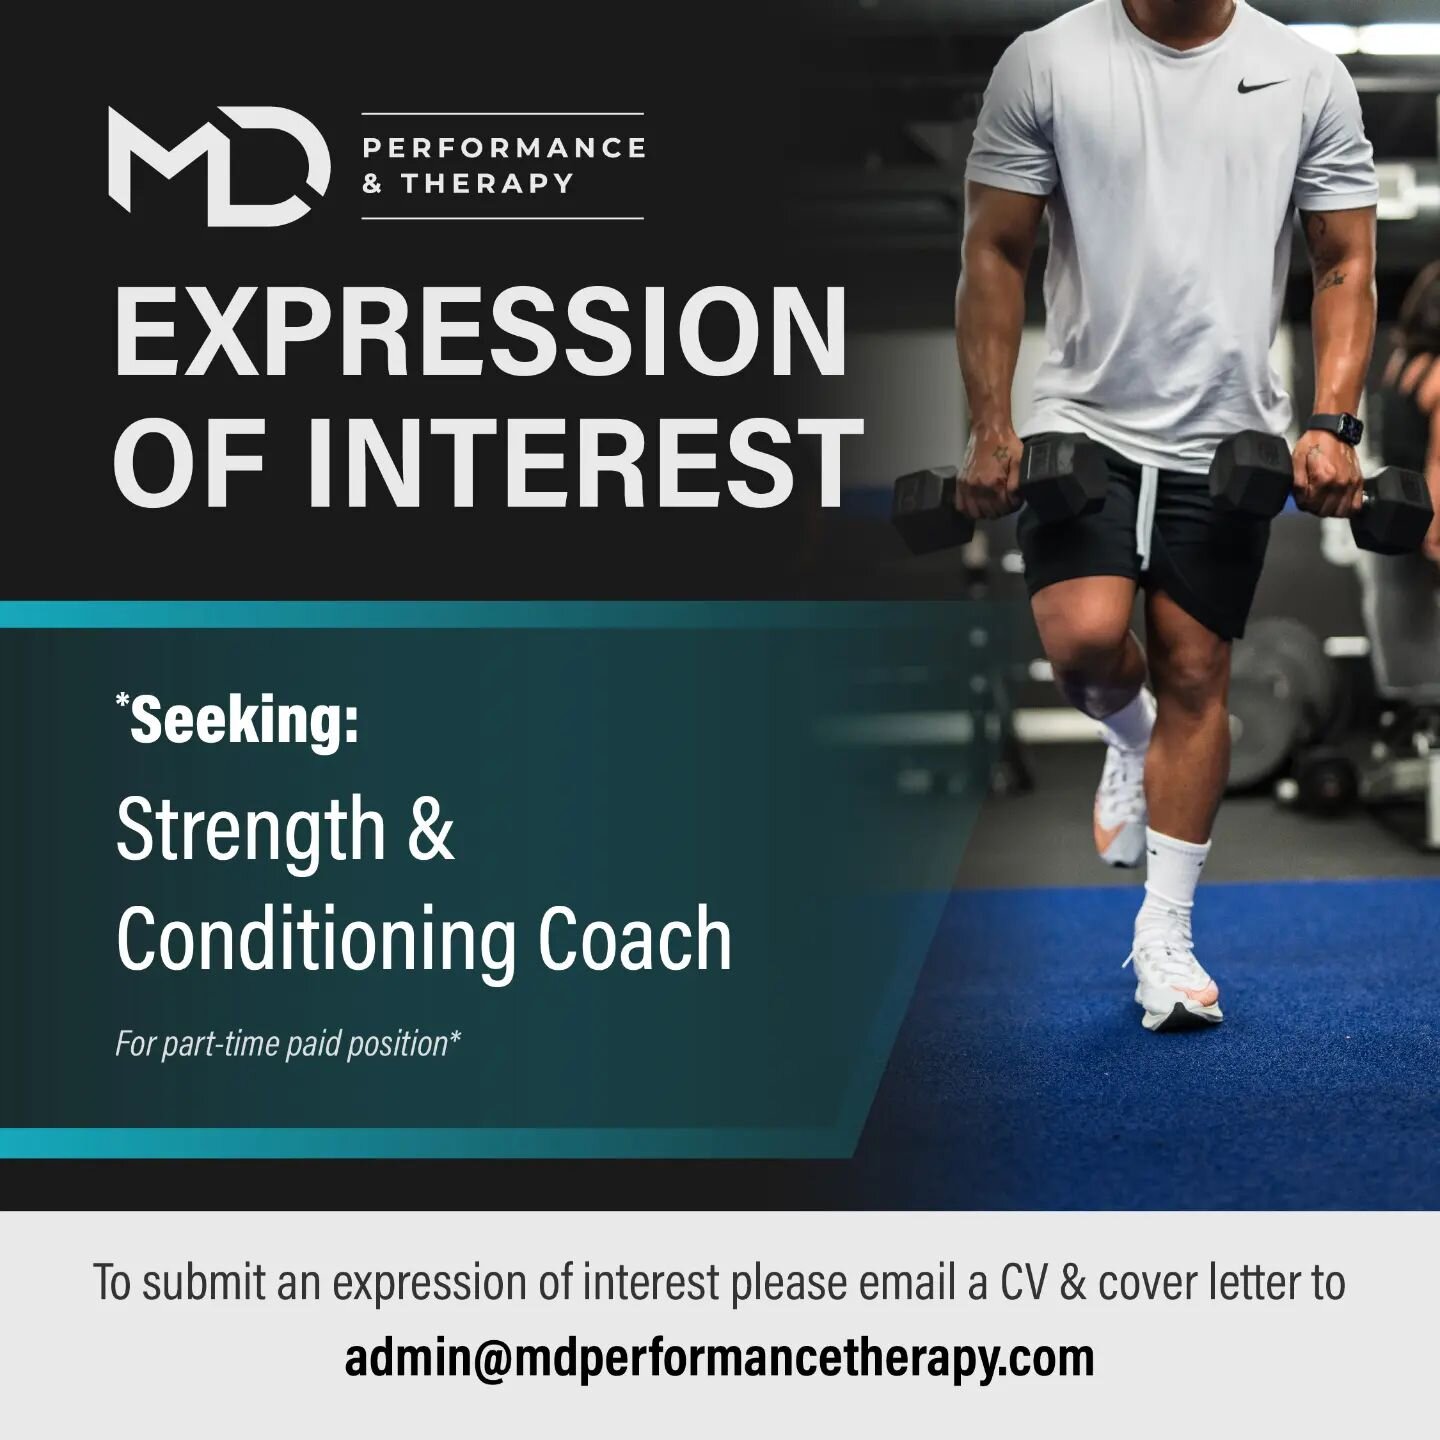 Seeking expressions of interest from suitably qualified practitioners for the following role at MD Performance &amp; Therapy:

⬜️ Strength &amp; Conditioning Coach

The ideal candidate will be passionate, ambitious and eager to learn and develop as a